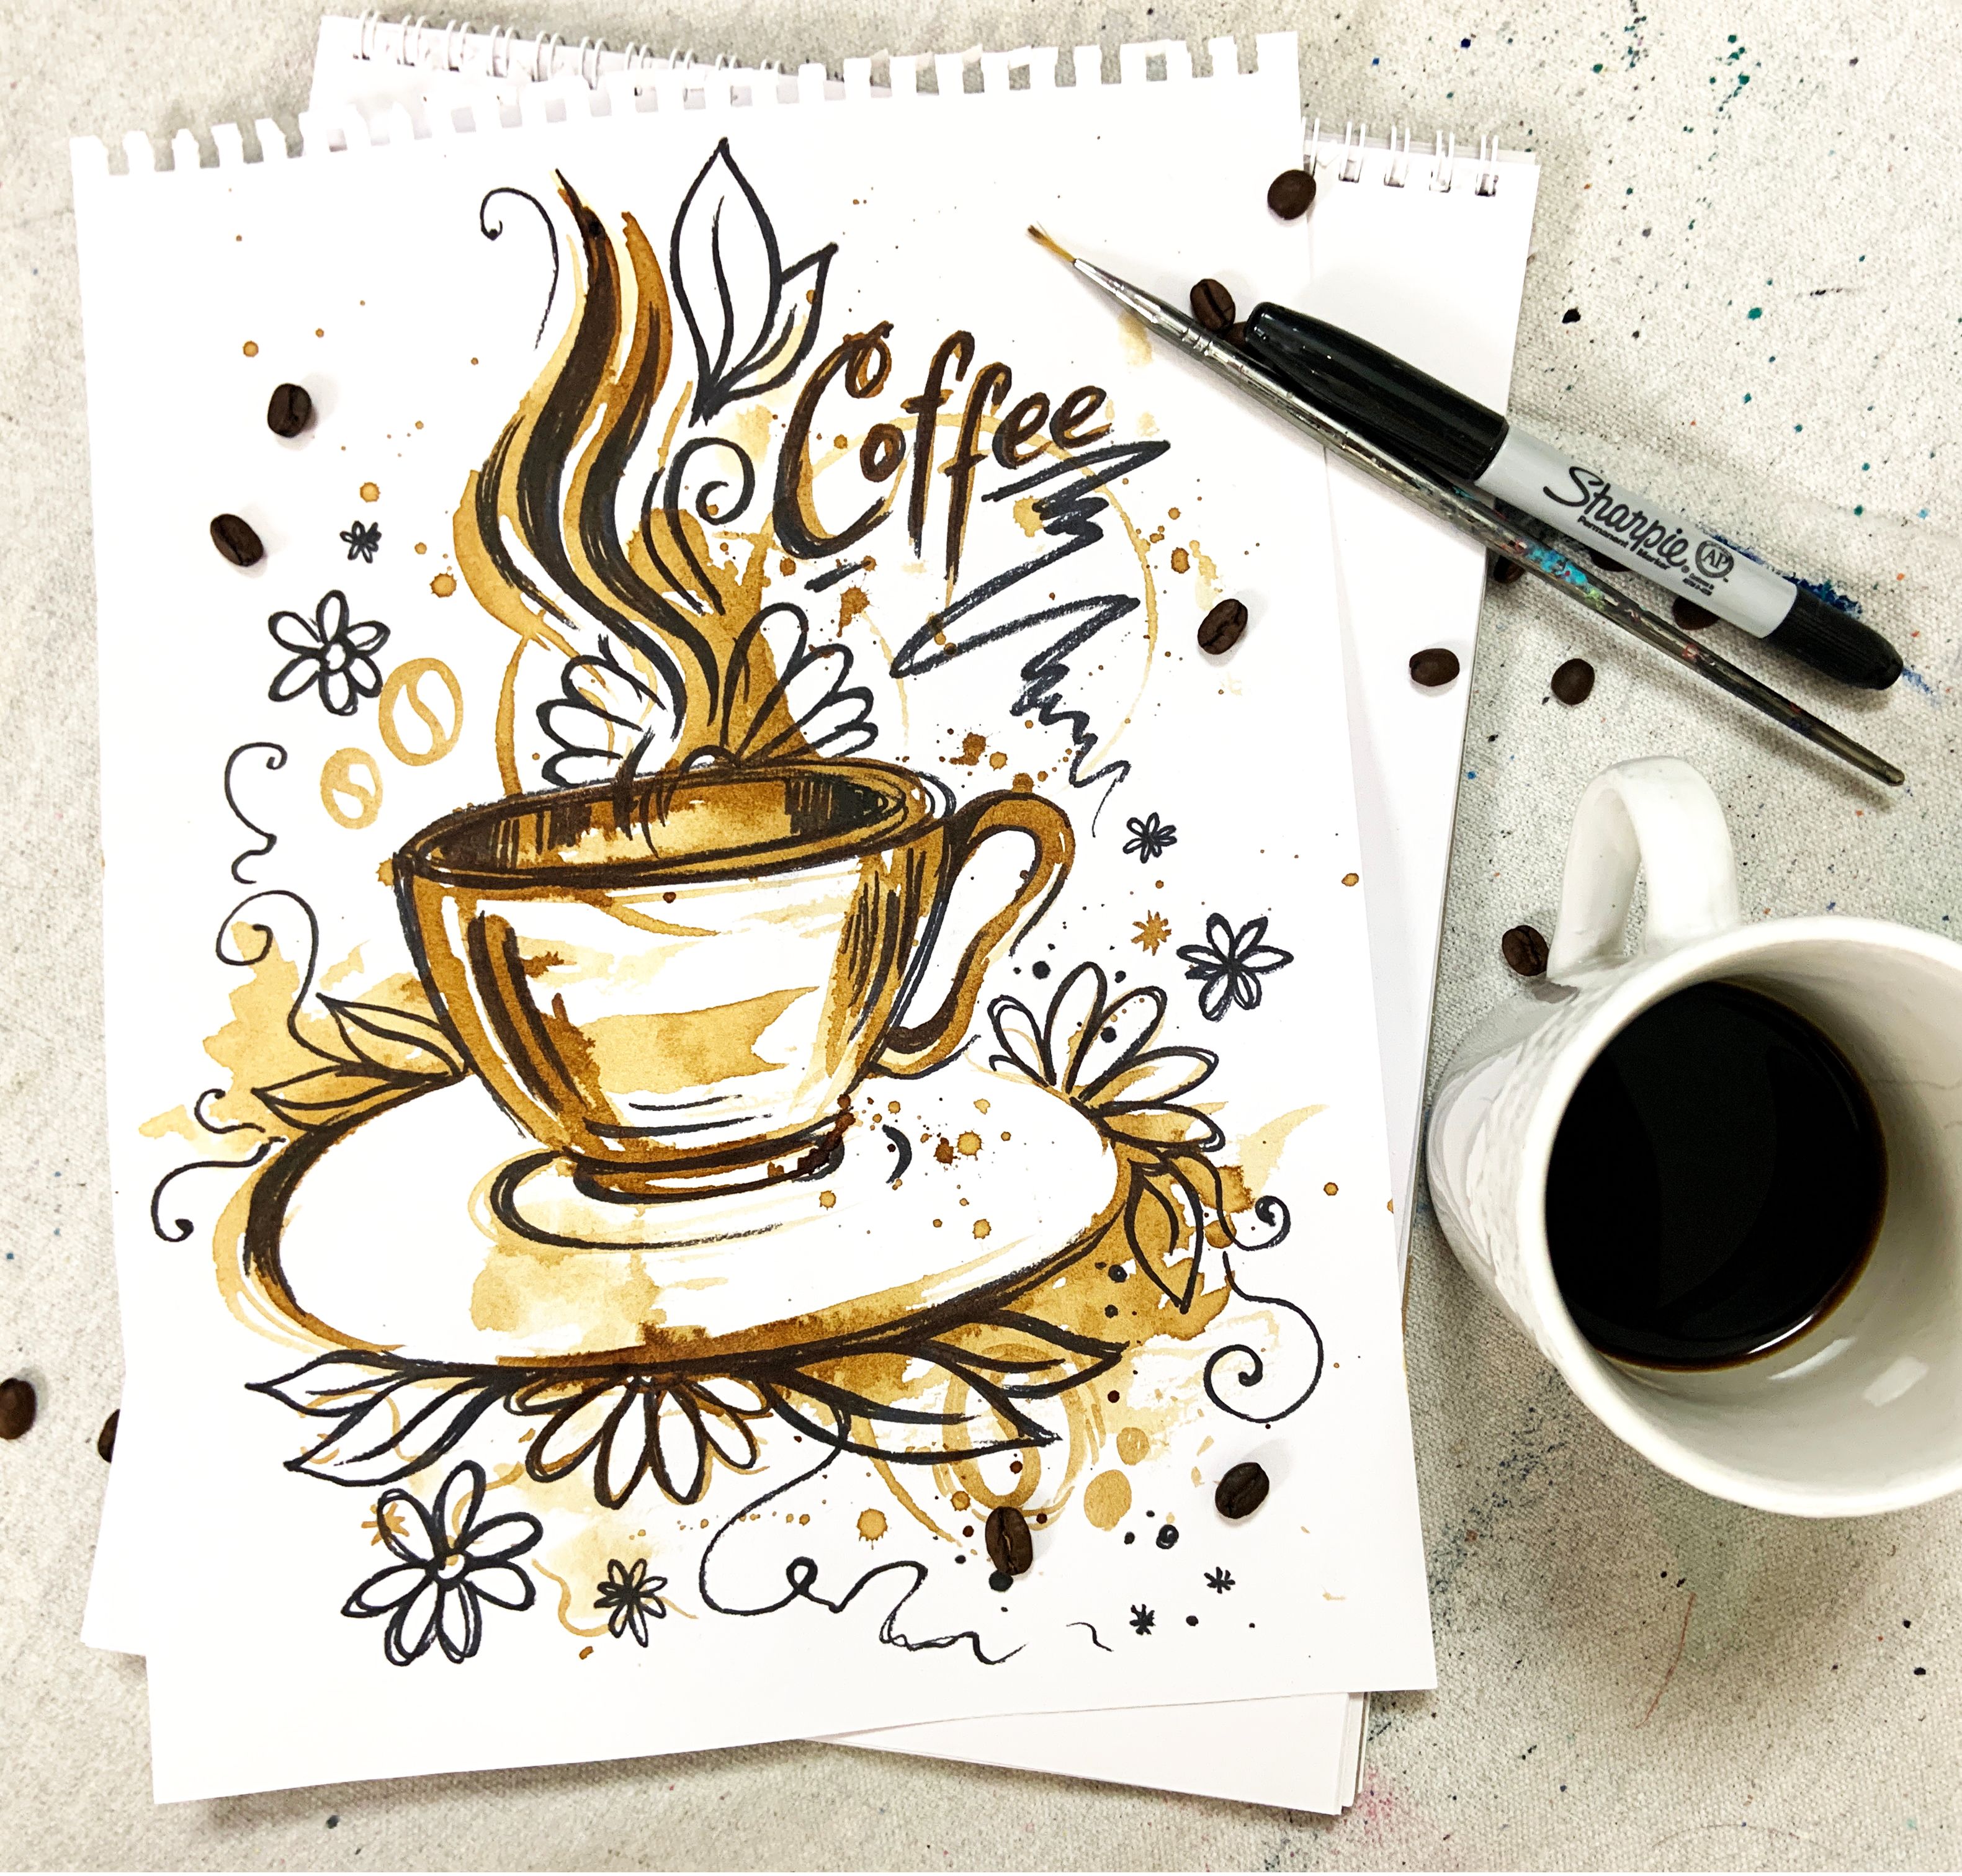 A Coffee and sharpie cute mug sketch  Virtual Event experience project by Yaymaker